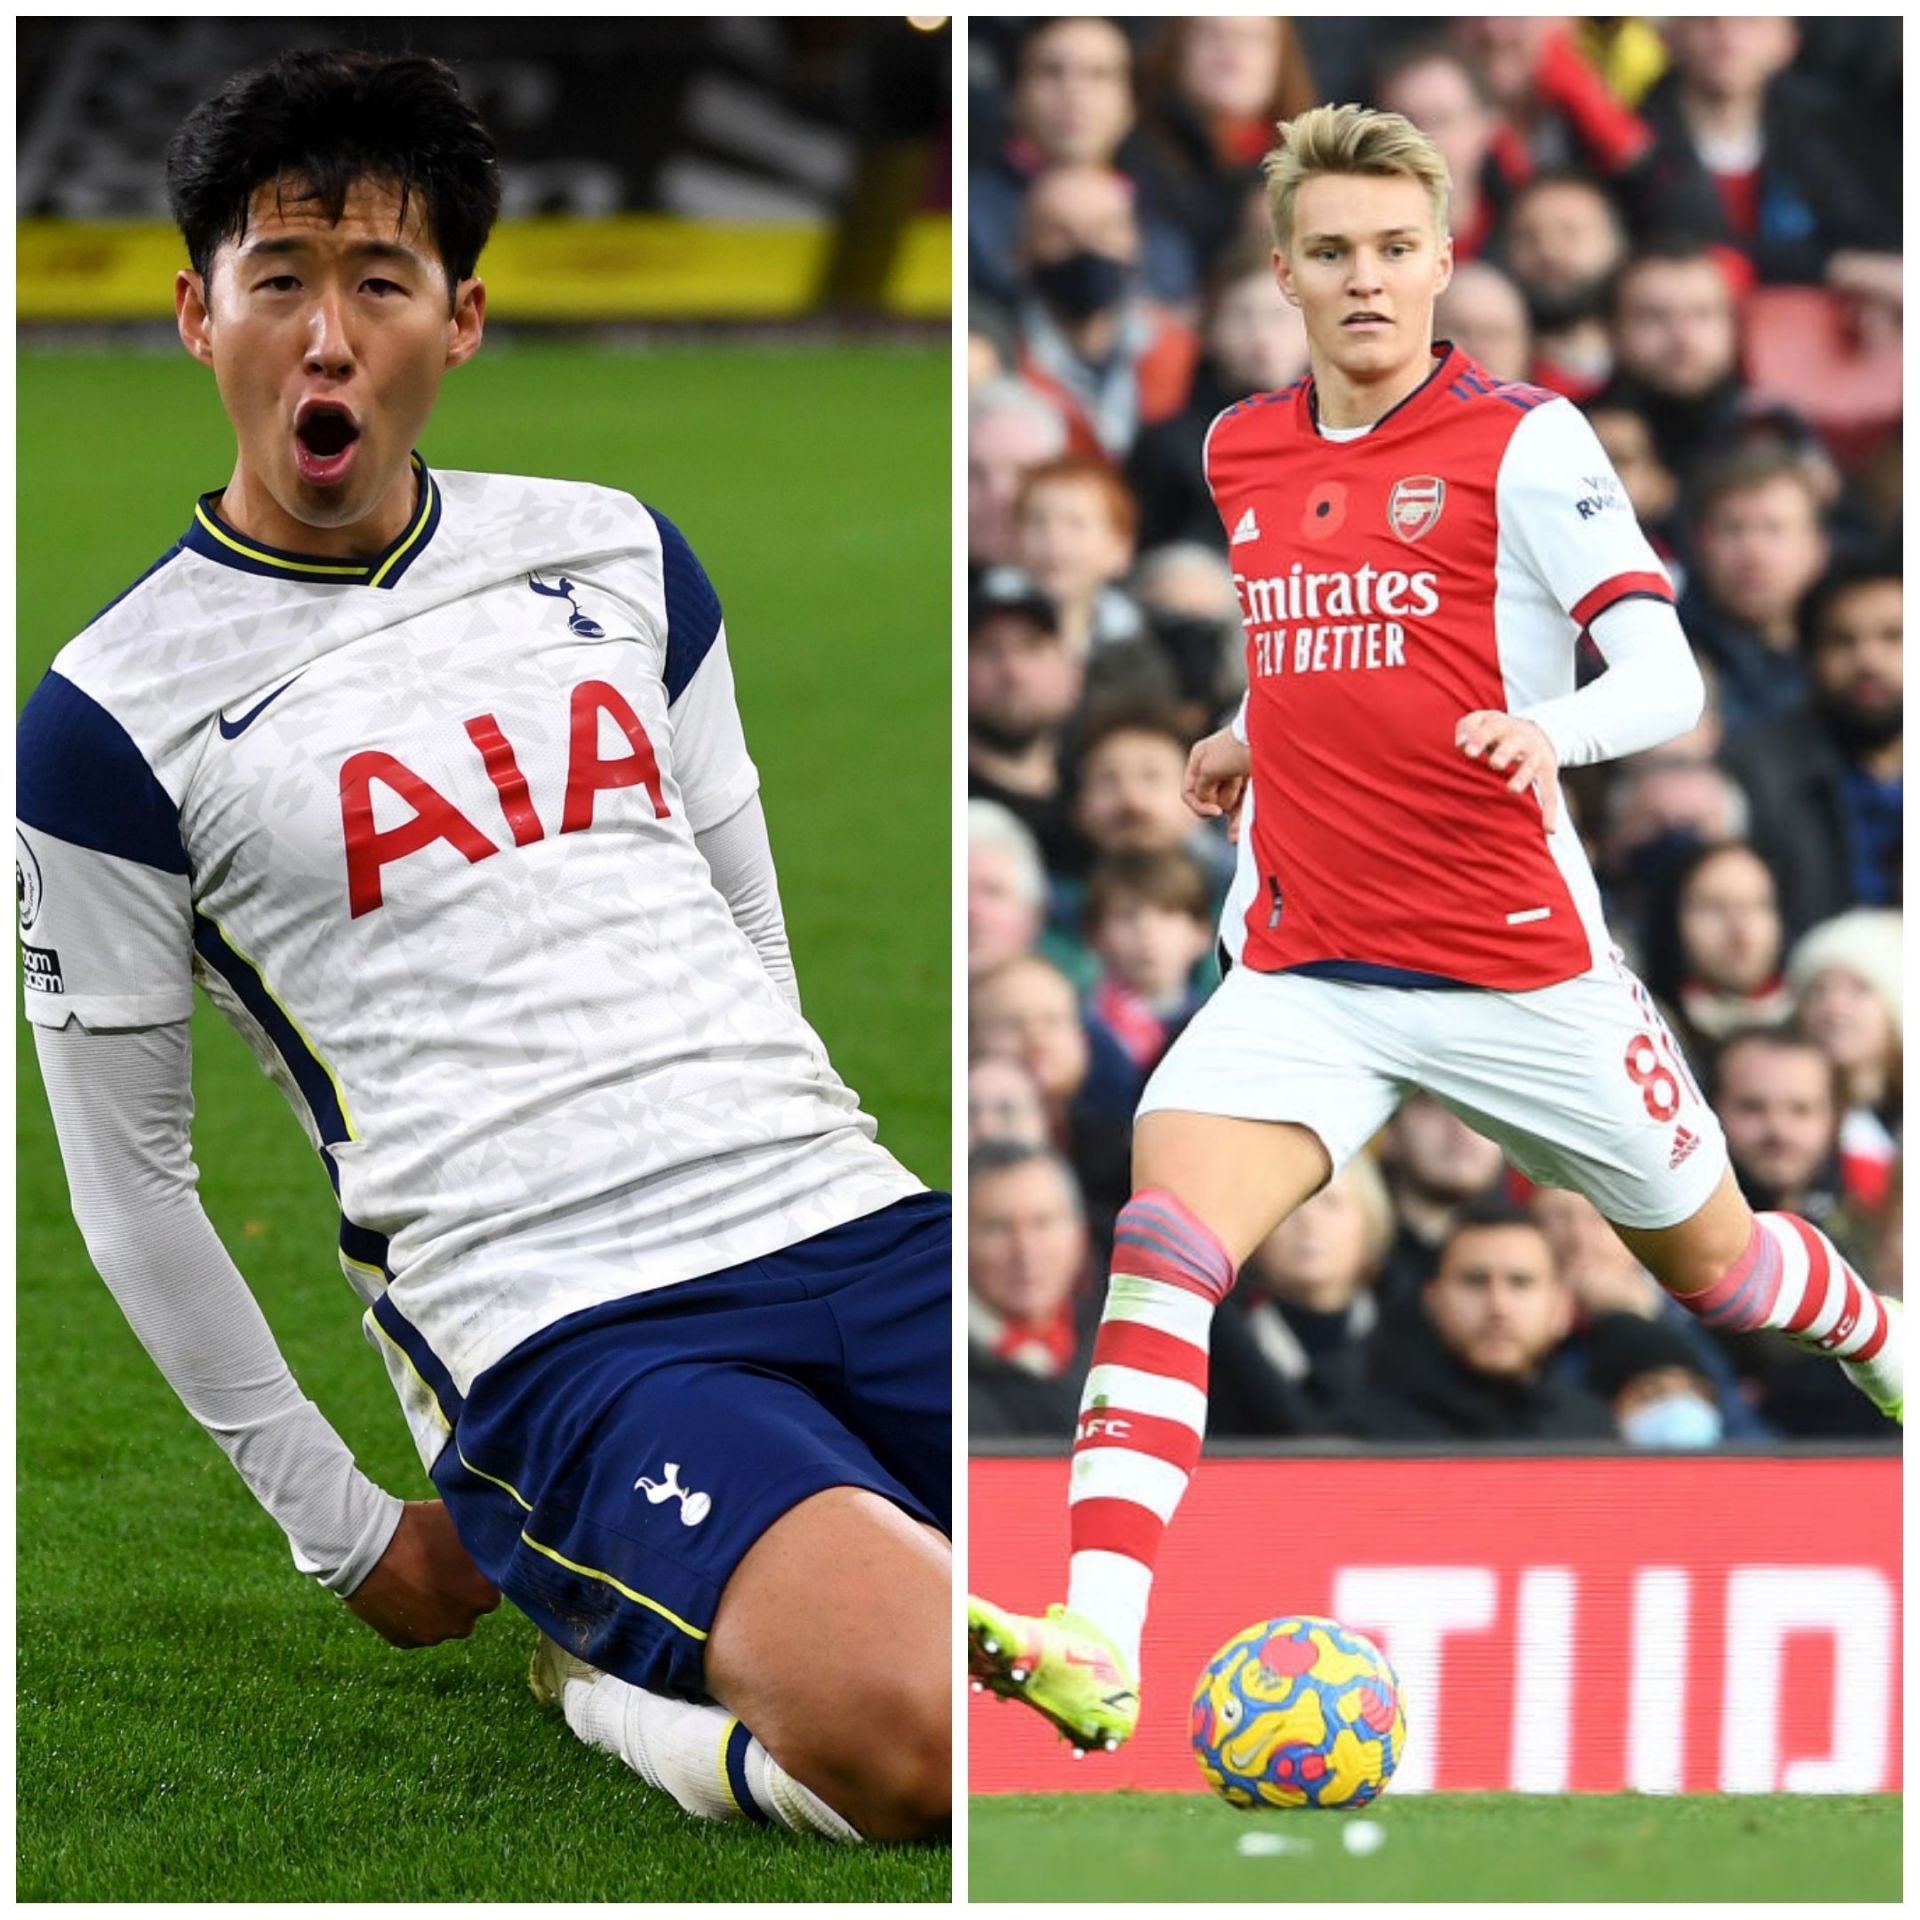 Son Heung-Min of Tottenham and Martin Odegaard of Arsenal